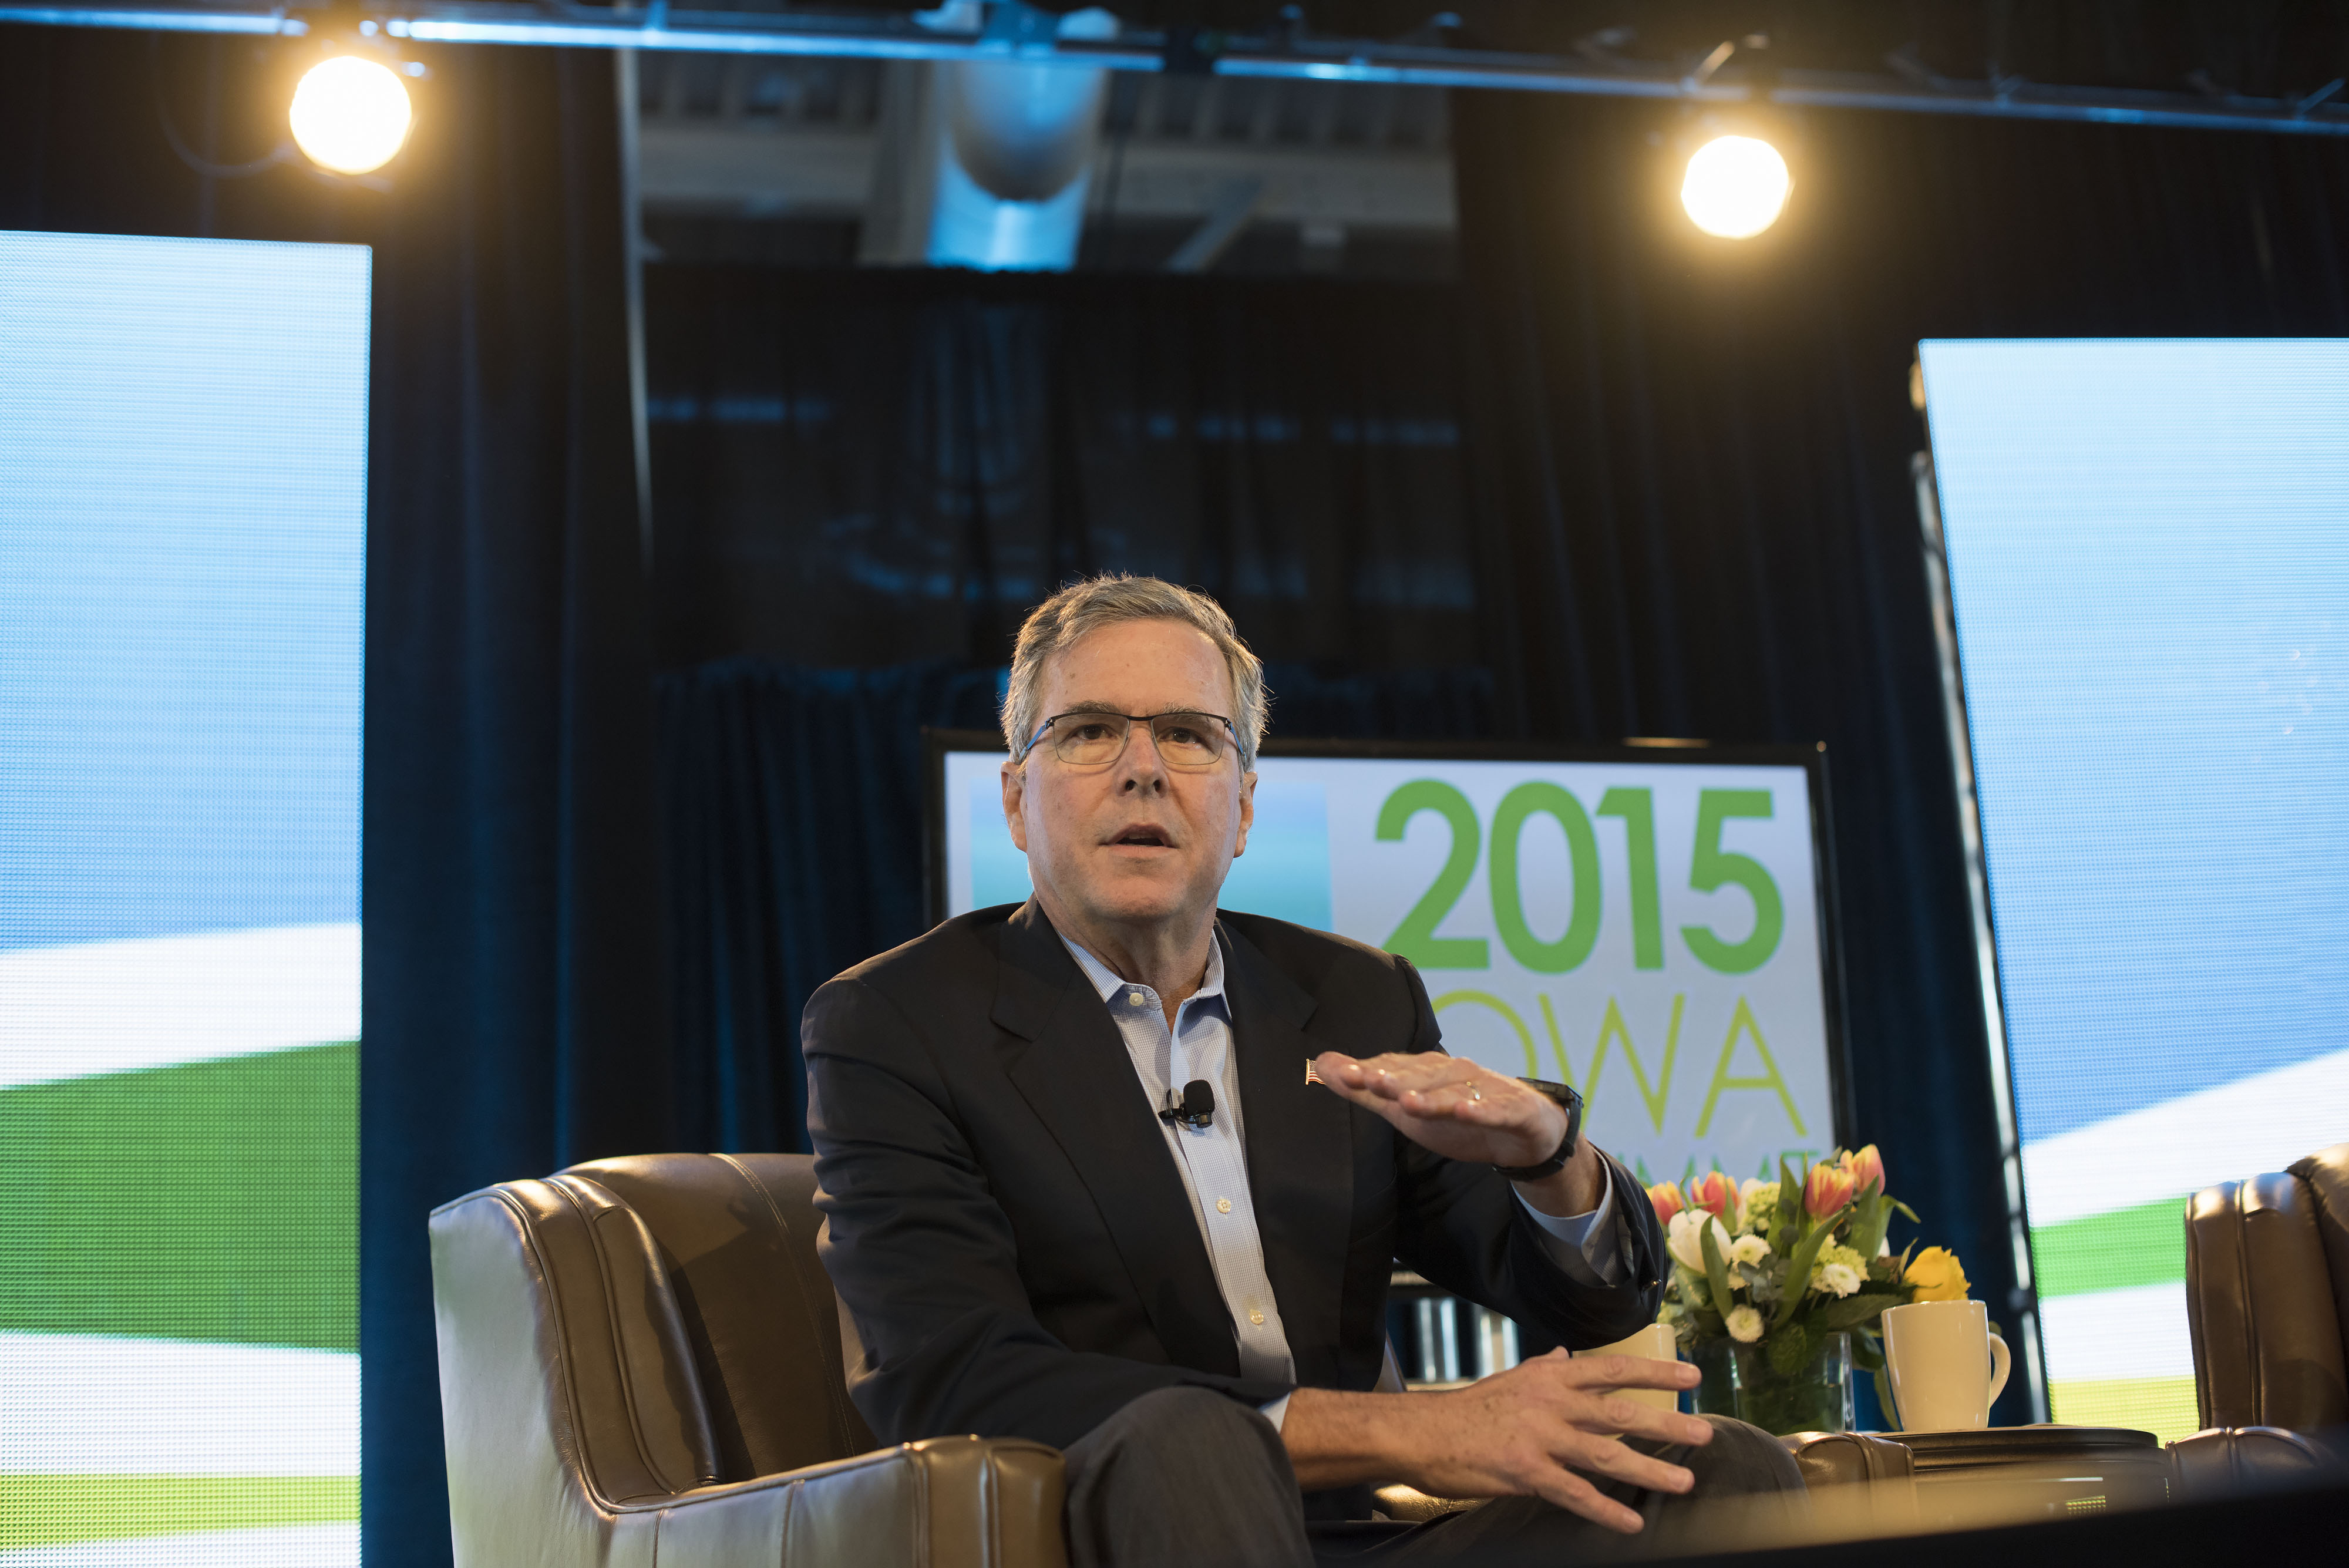 Jeb Bush, former governor of Florida, speaks during the Iowa Ag Summit at the Iowa State Fairgrounds in Des Moines, Iowa on March 7, 2015 (Daniel Acker—Bloomberg Finance LP 2015/Getty Images)